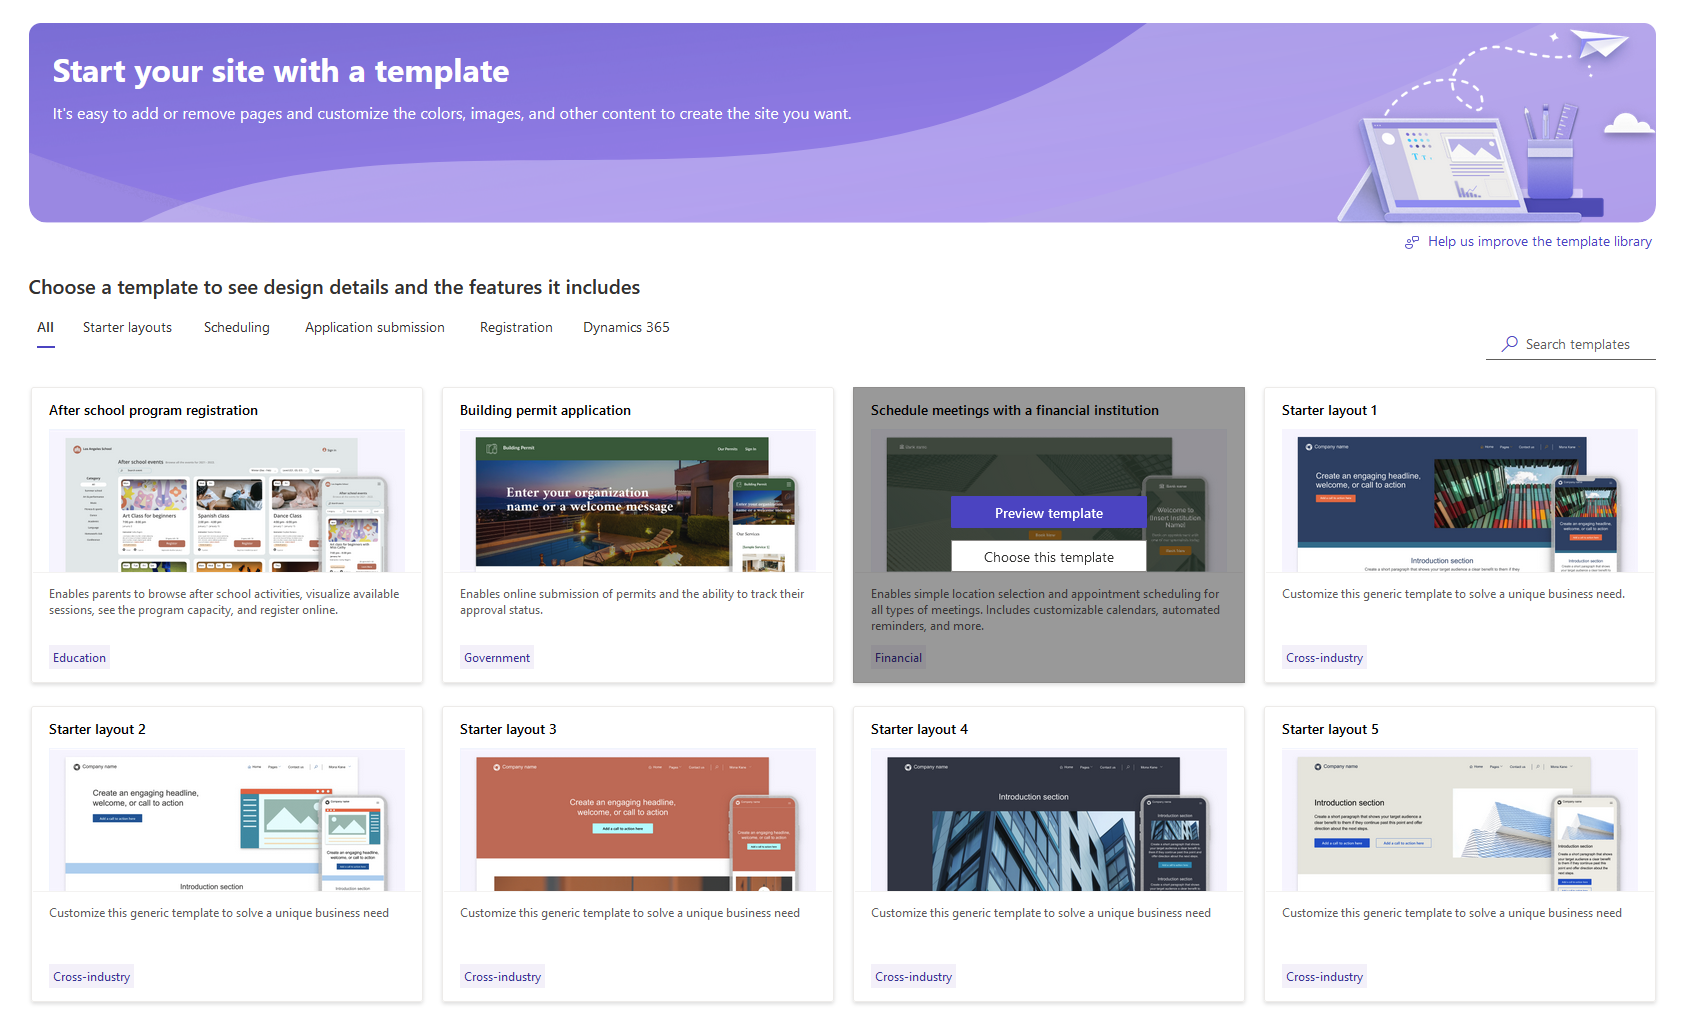 Selection of templates when creating a new site.